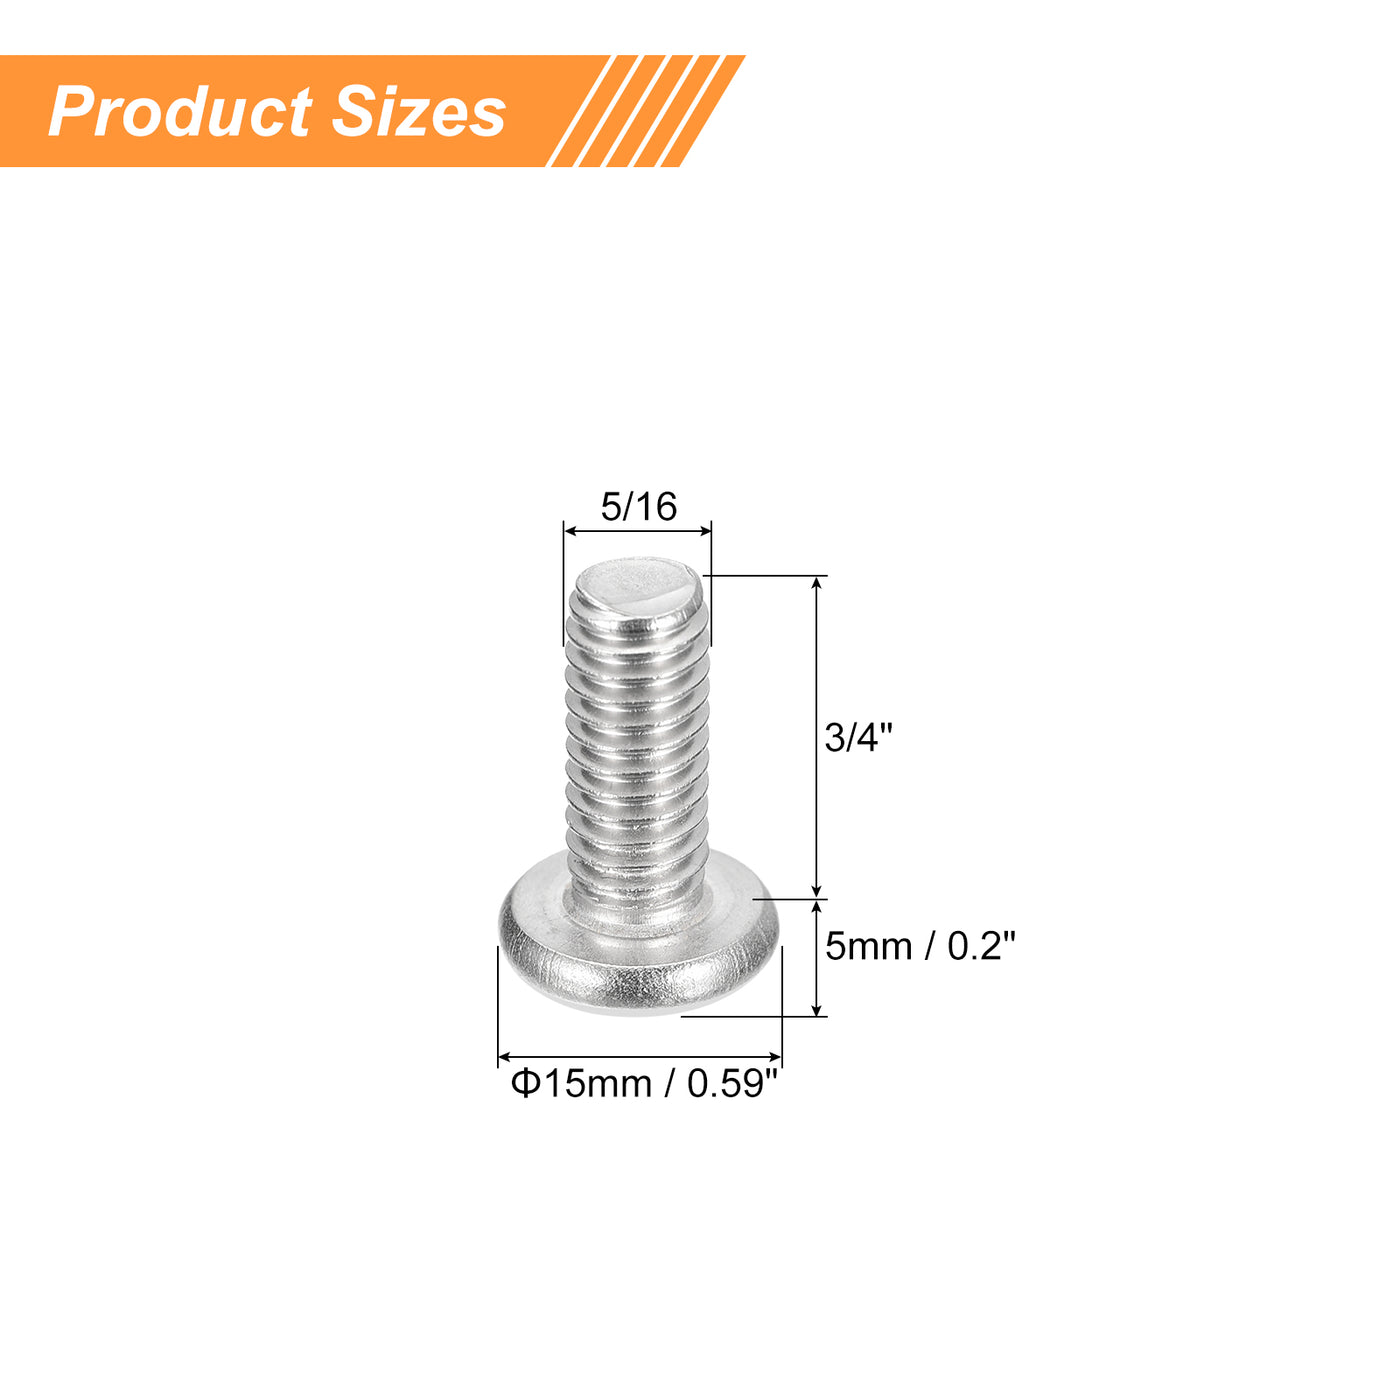 uxcell Uxcell 5/16-18x3/4" Pan Head Machine Screws, Stainless Steel 18-8 Screw, Pack of 10